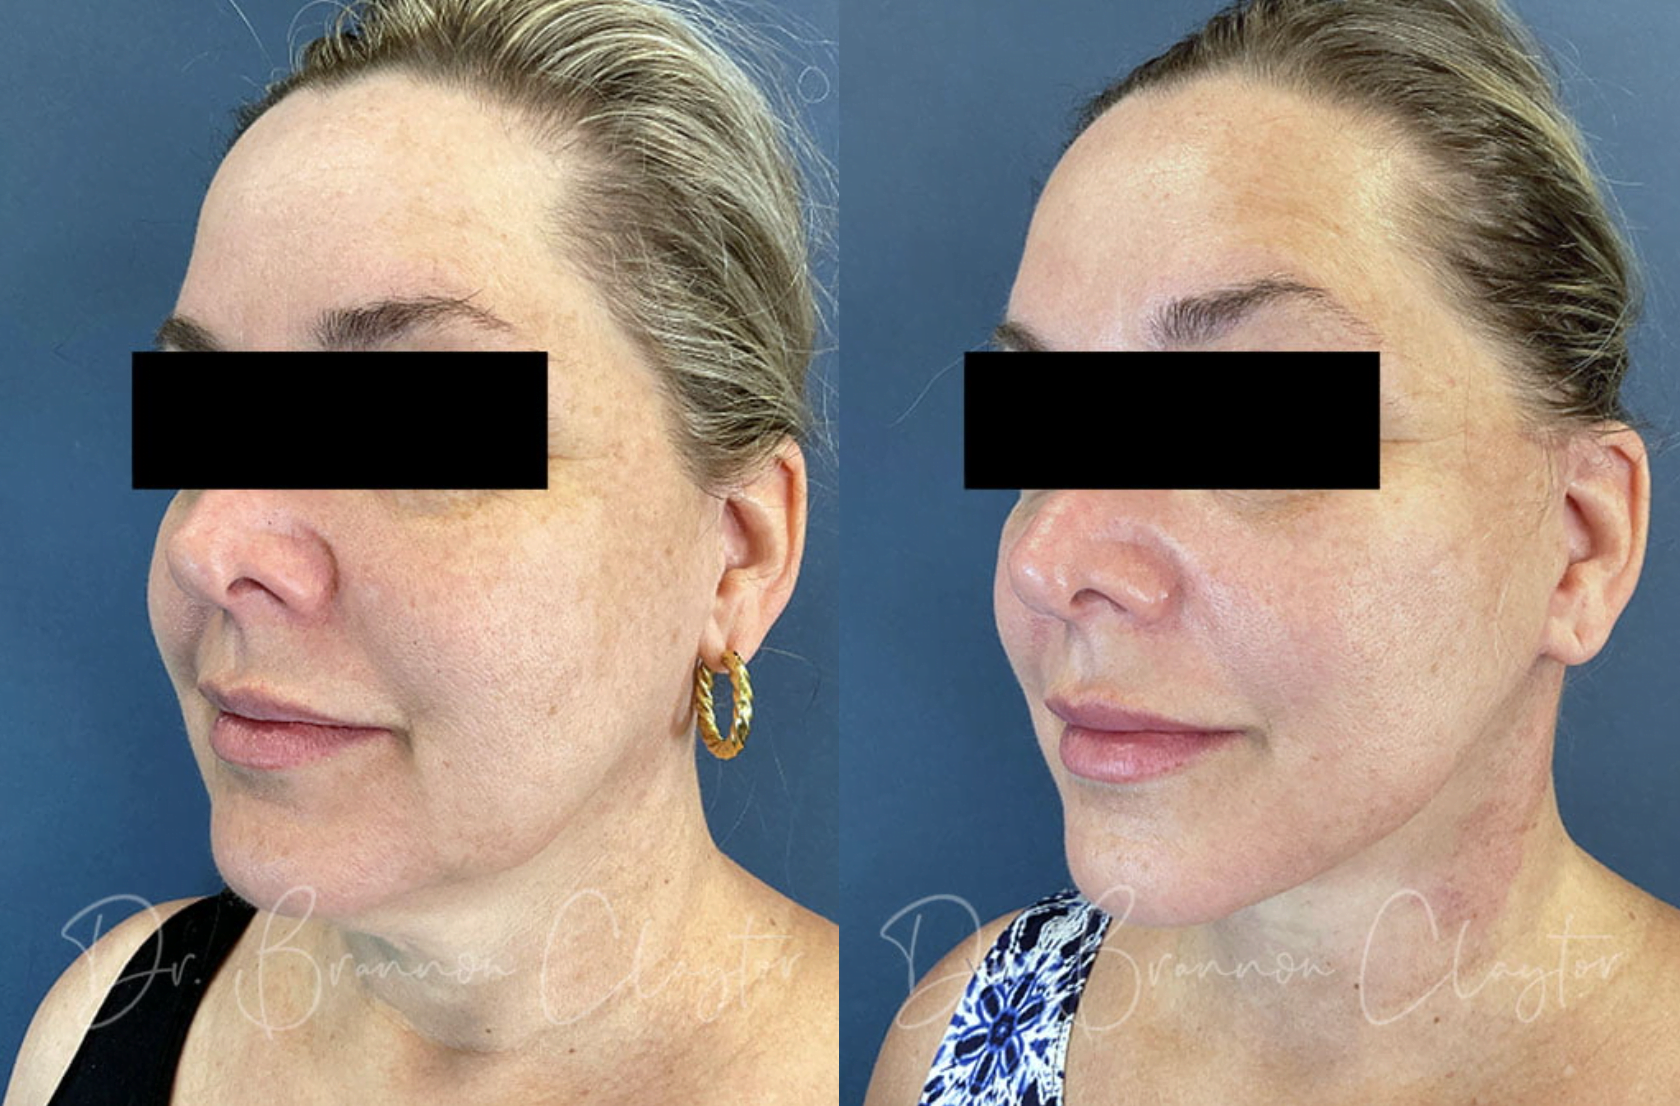 Patient shown before and after a facelift and neck lift by Philadelphia plastic surgeon Dr. R. Brannon Claytor